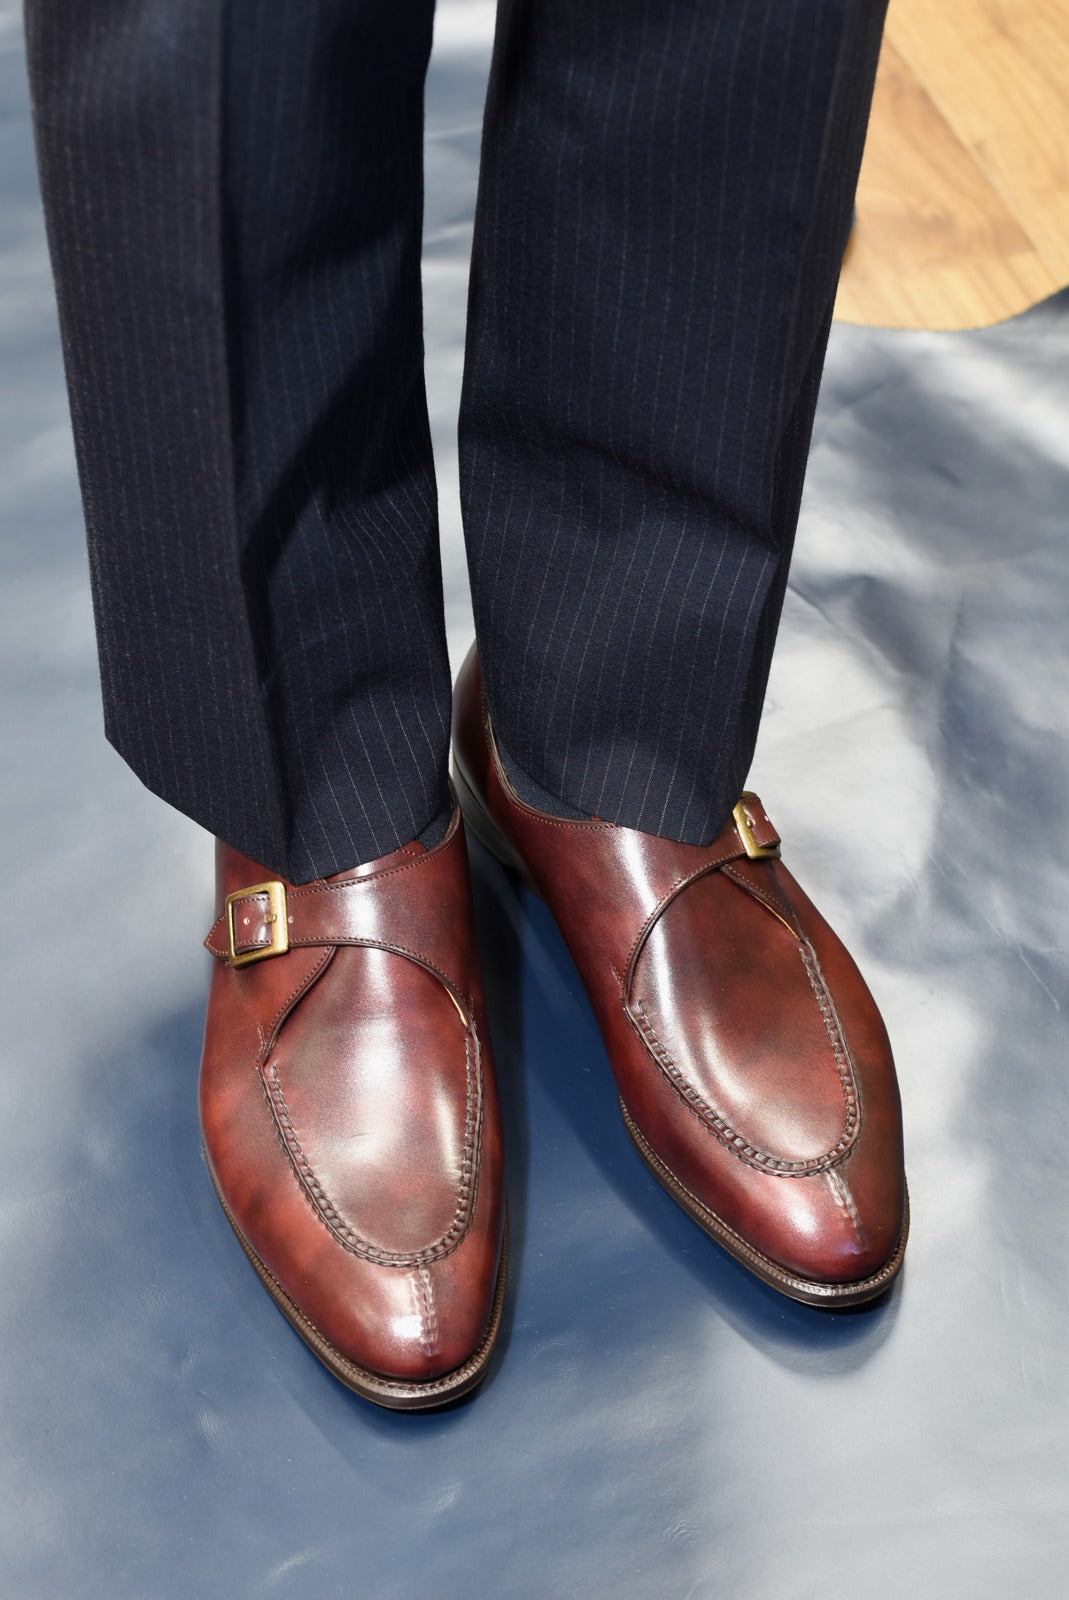 “Alroy” Split Toe Single Monk Strap, Burgundy Dress Shoes,  Zonta Museum Calf, Hand welted, US size 5 1/2 ~ 10